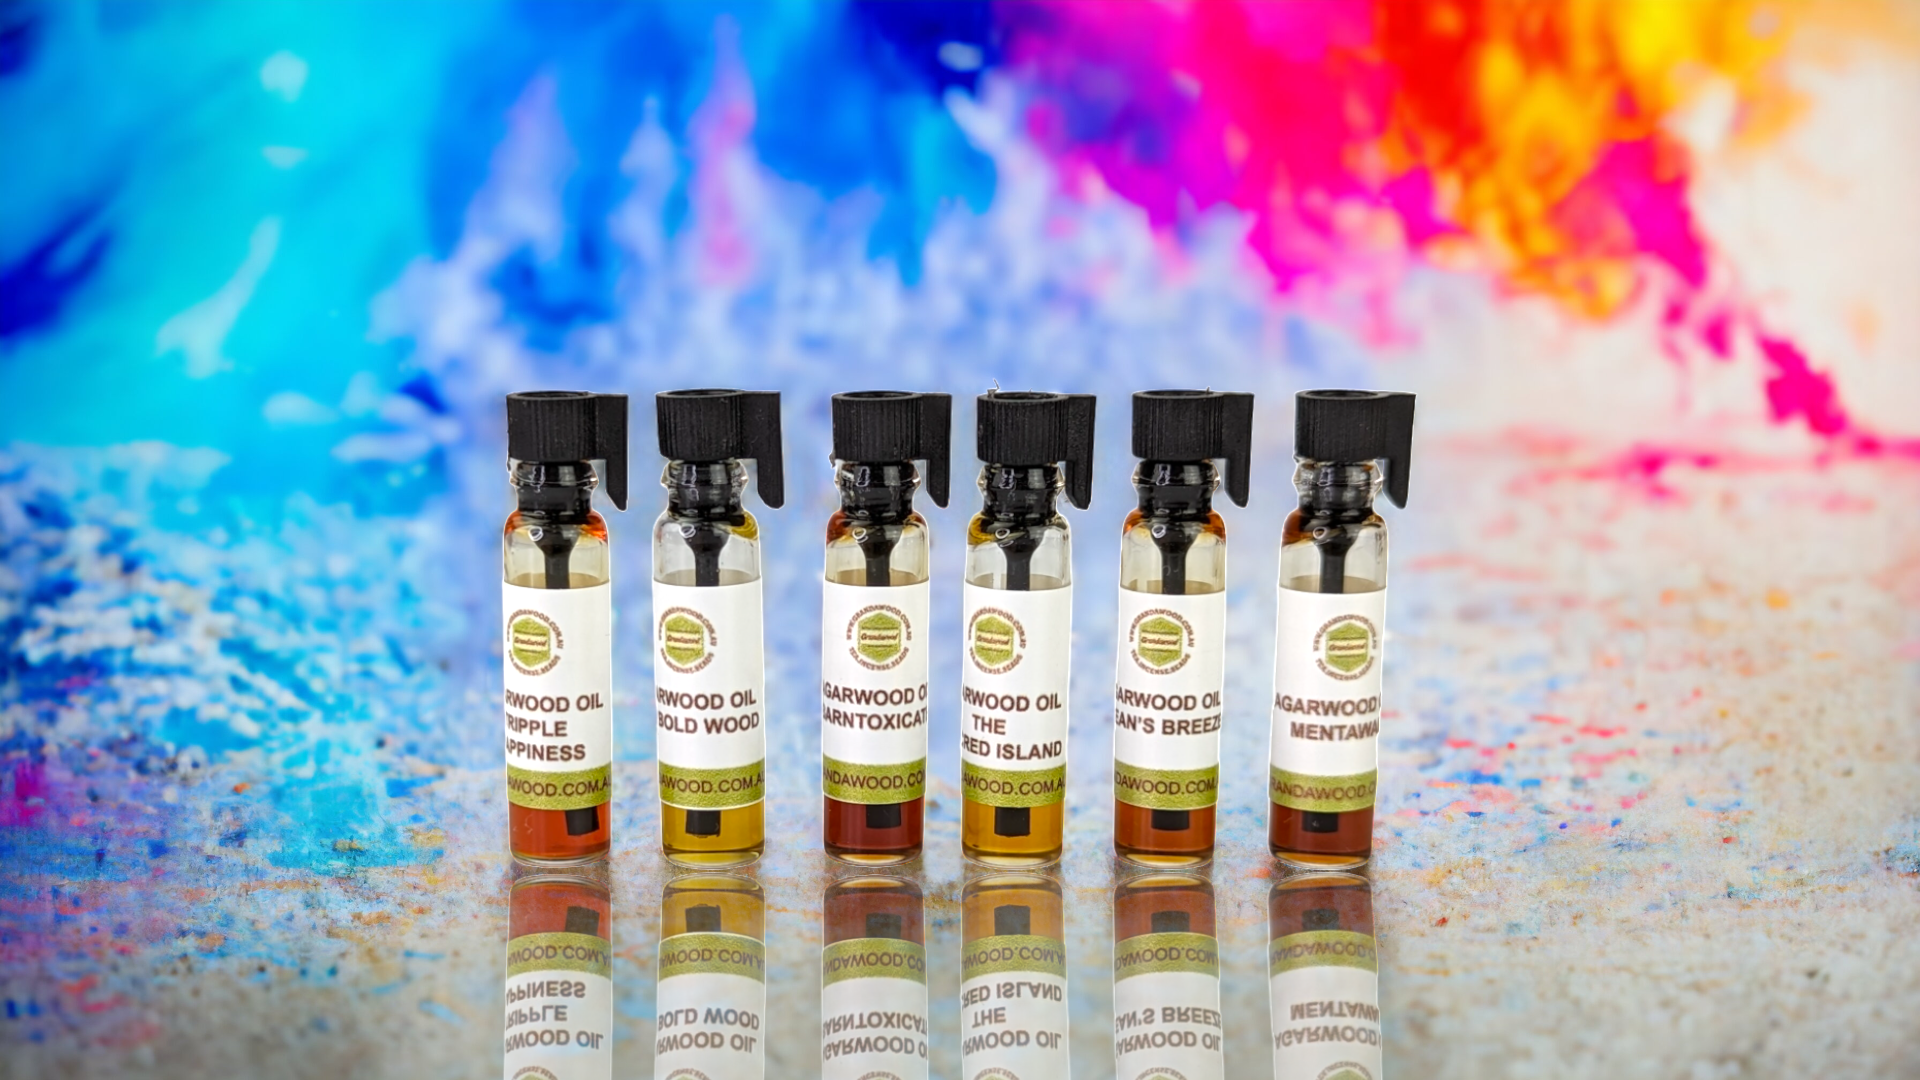 Agarwood (Oud) Essential Oil Sample Kit- To people who want to smell genuine Oud but can't get started -